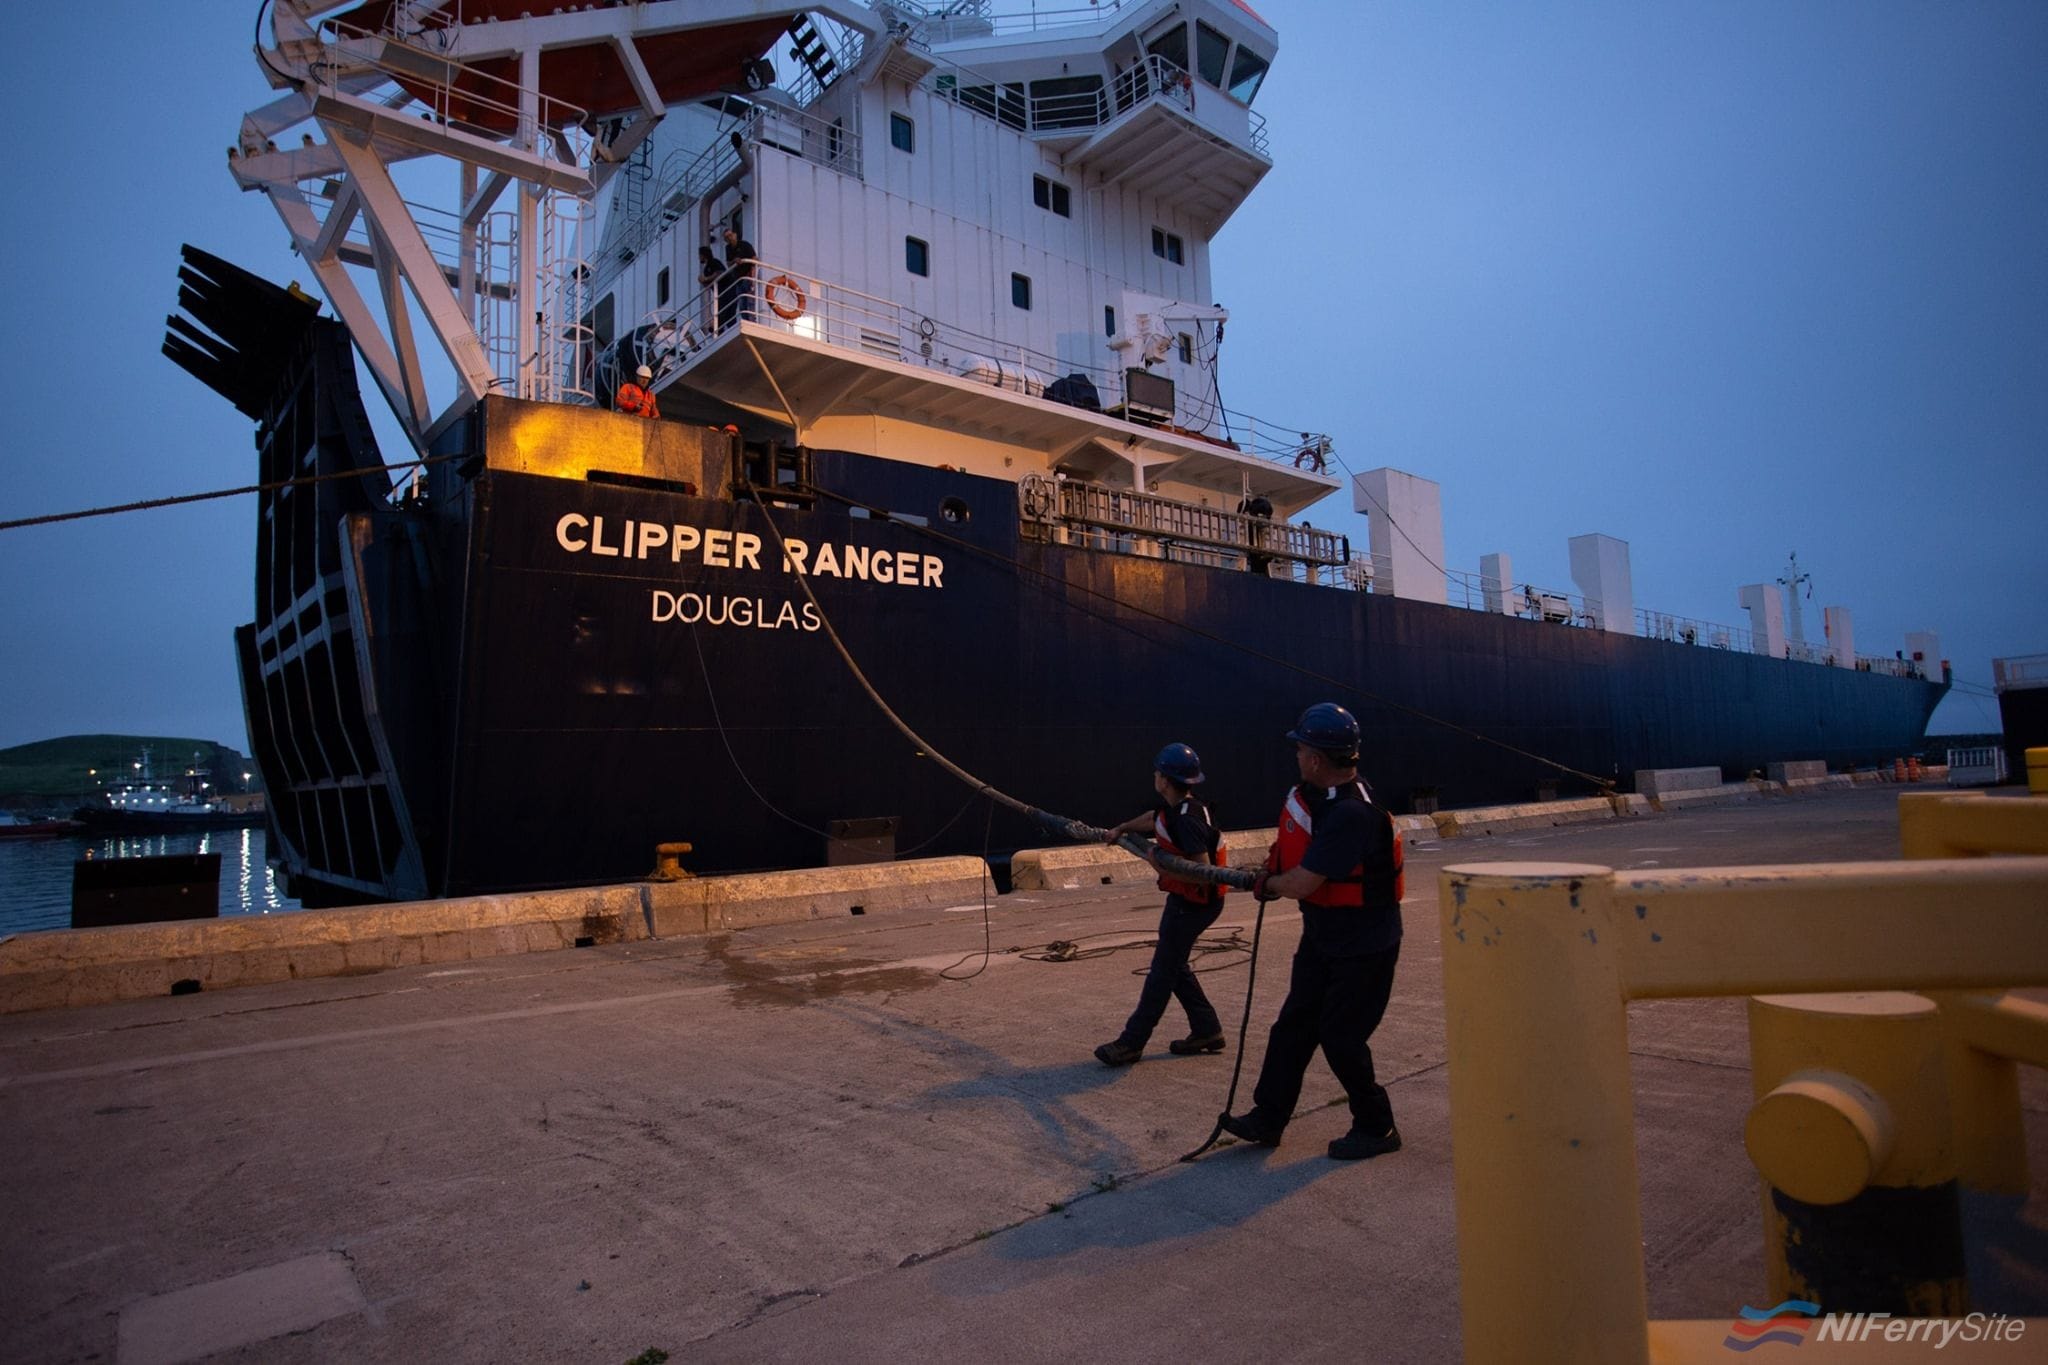 CLIPPER RANGER being tied up in Canada. CTMA.